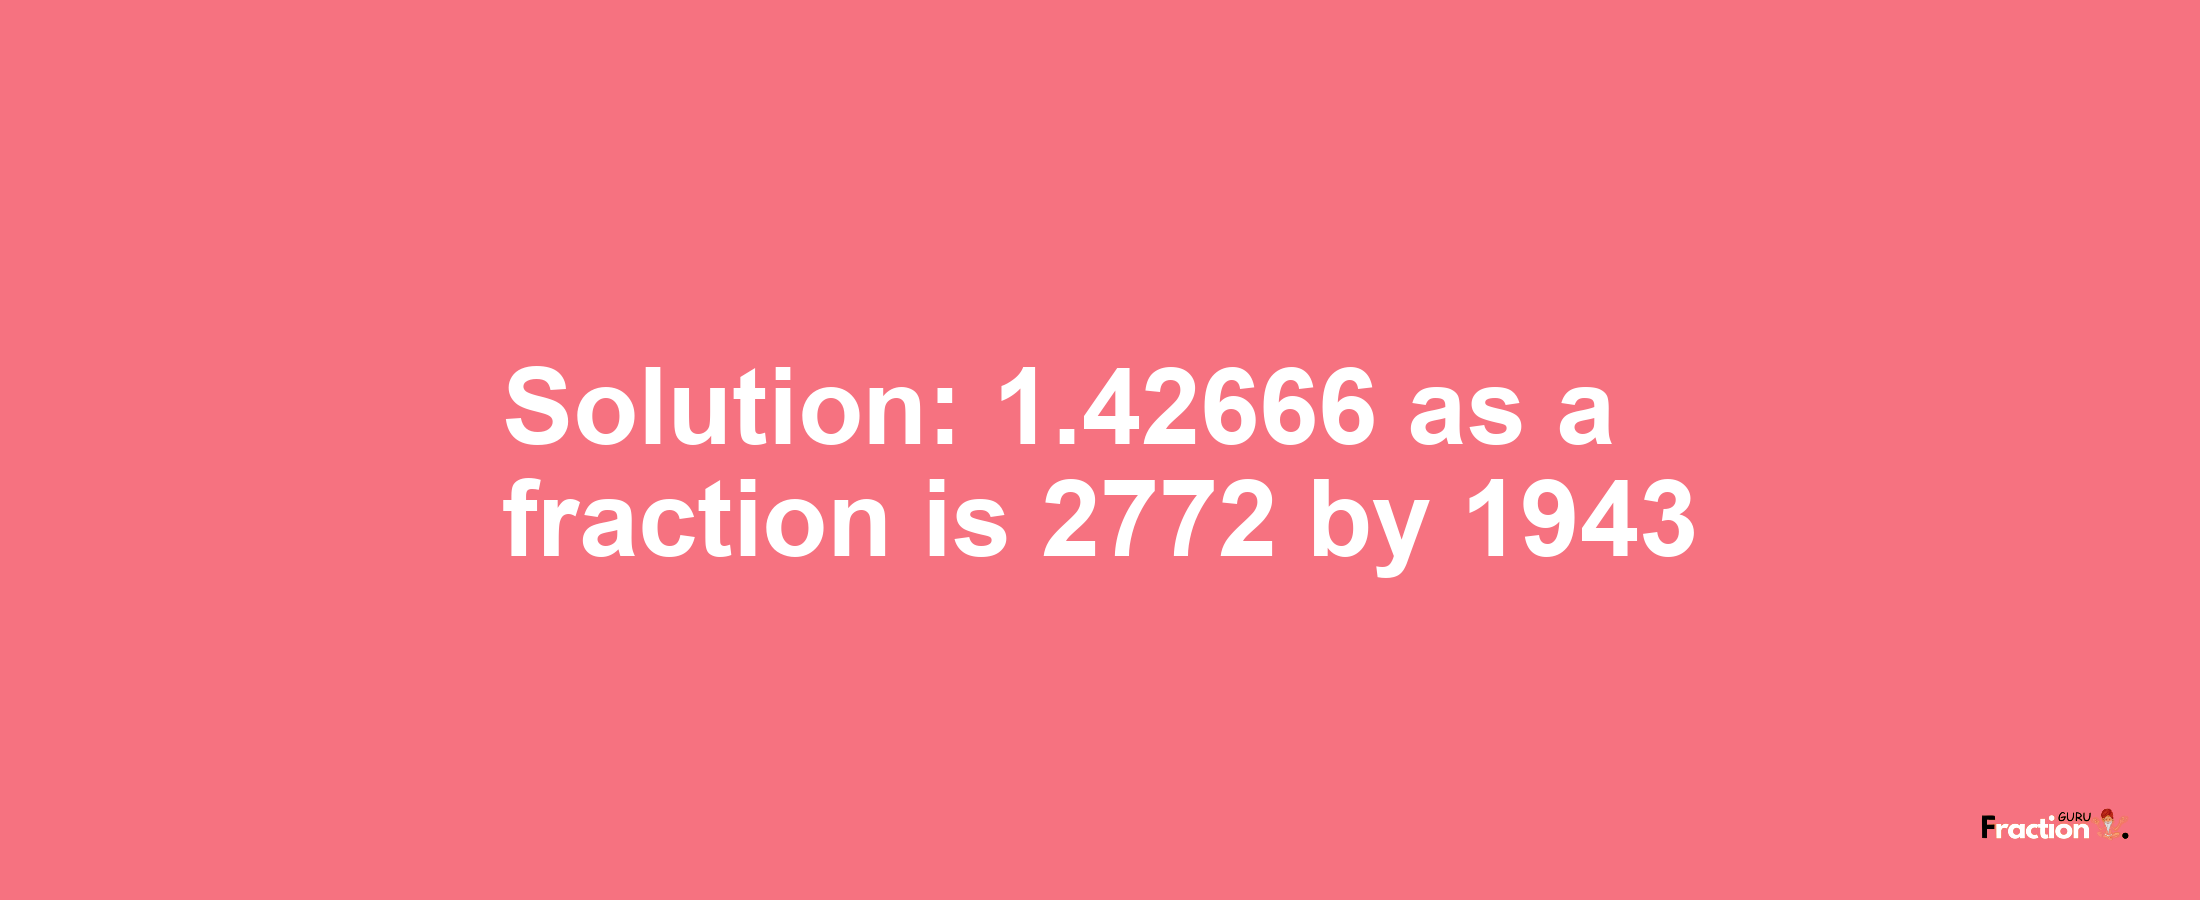 Solution:1.42666 as a fraction is 2772/1943